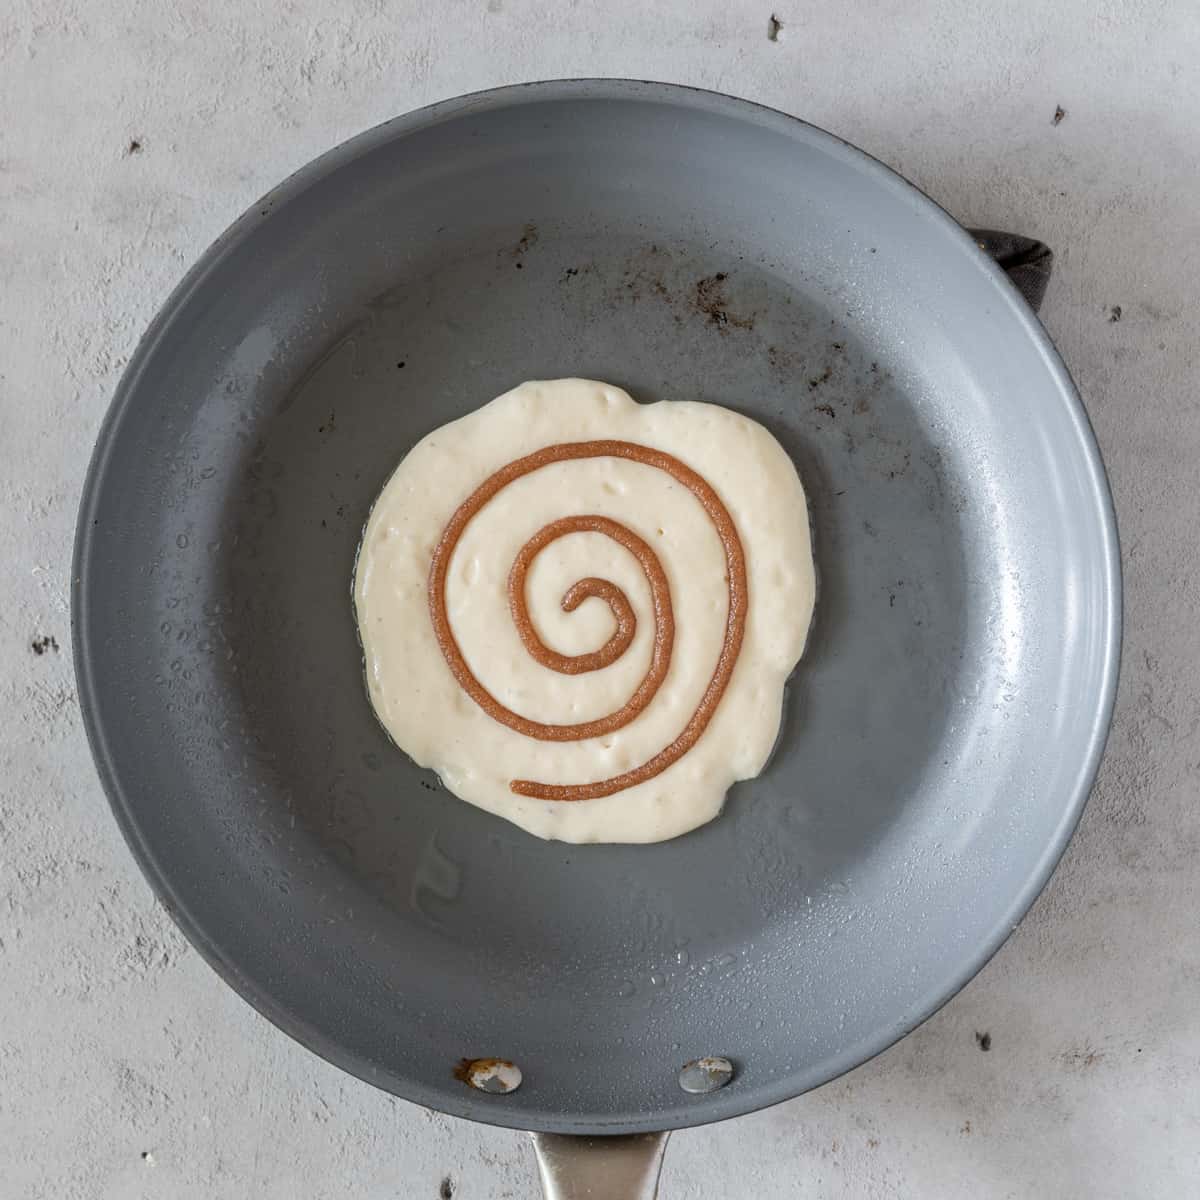 a cinnamon roll pancake being cooked on a skillet.